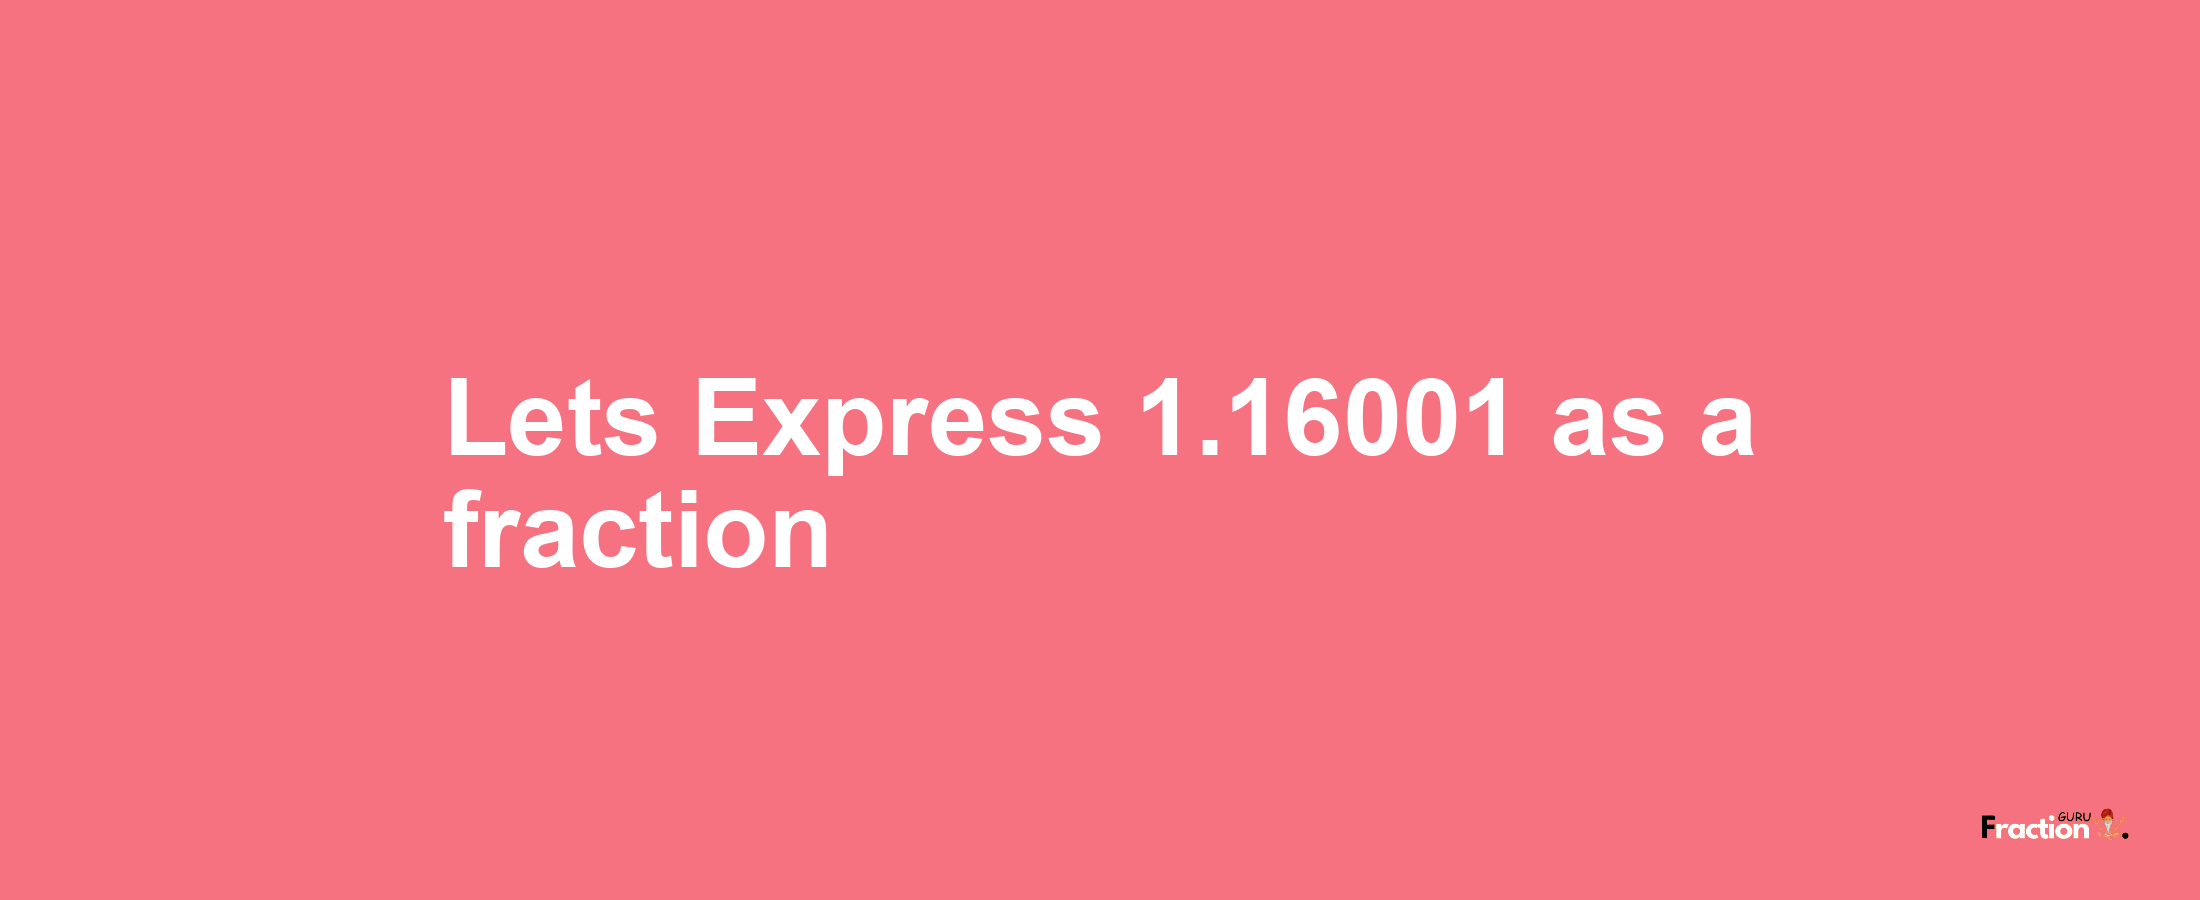 Lets Express 1.16001 as afraction